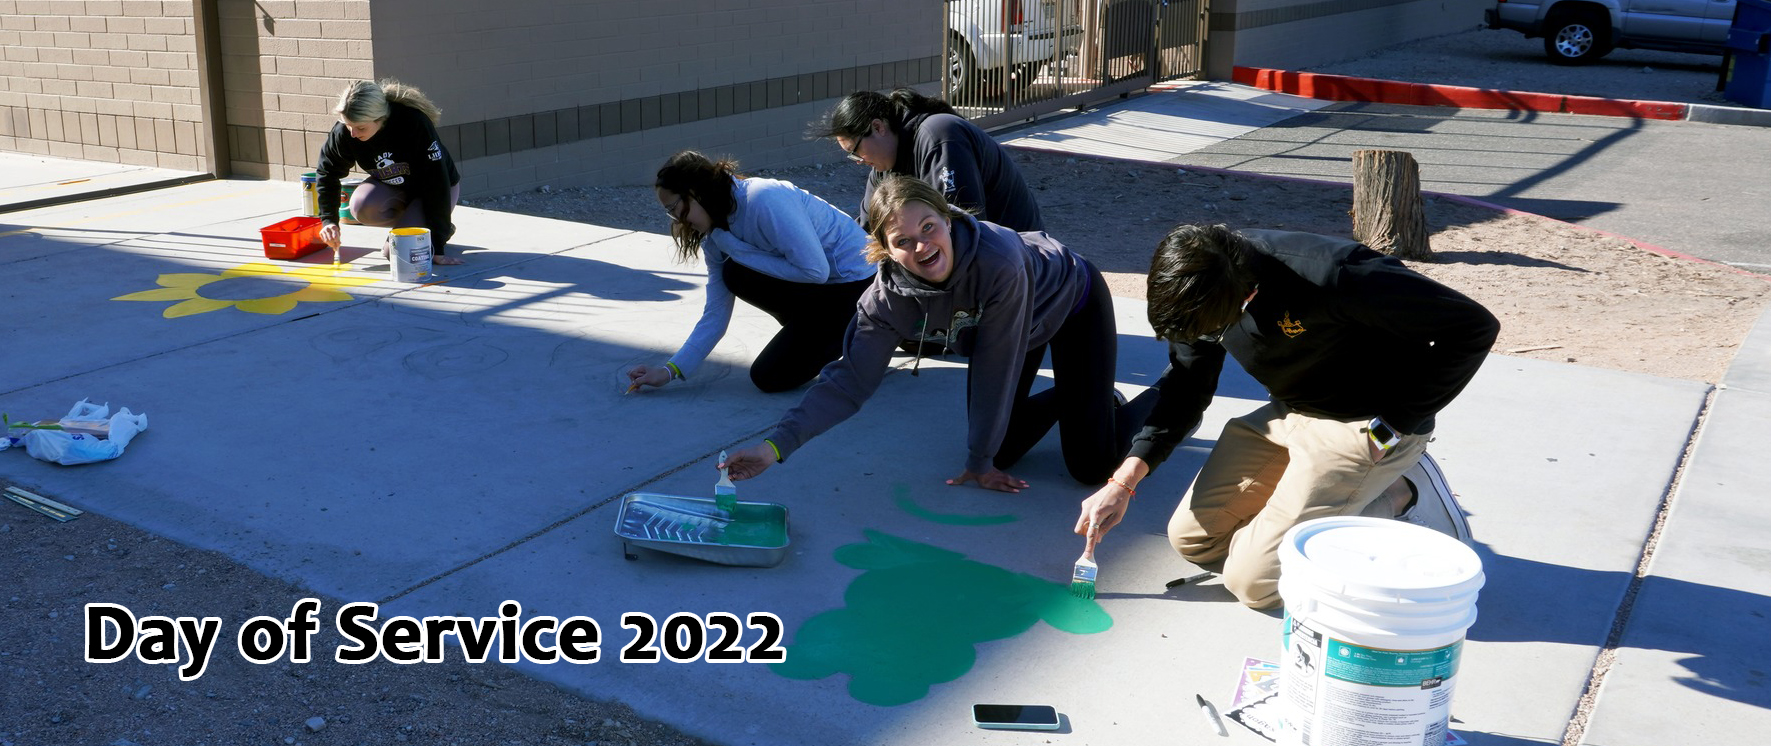 Girls painting sidewalk during 2022 Day of Service